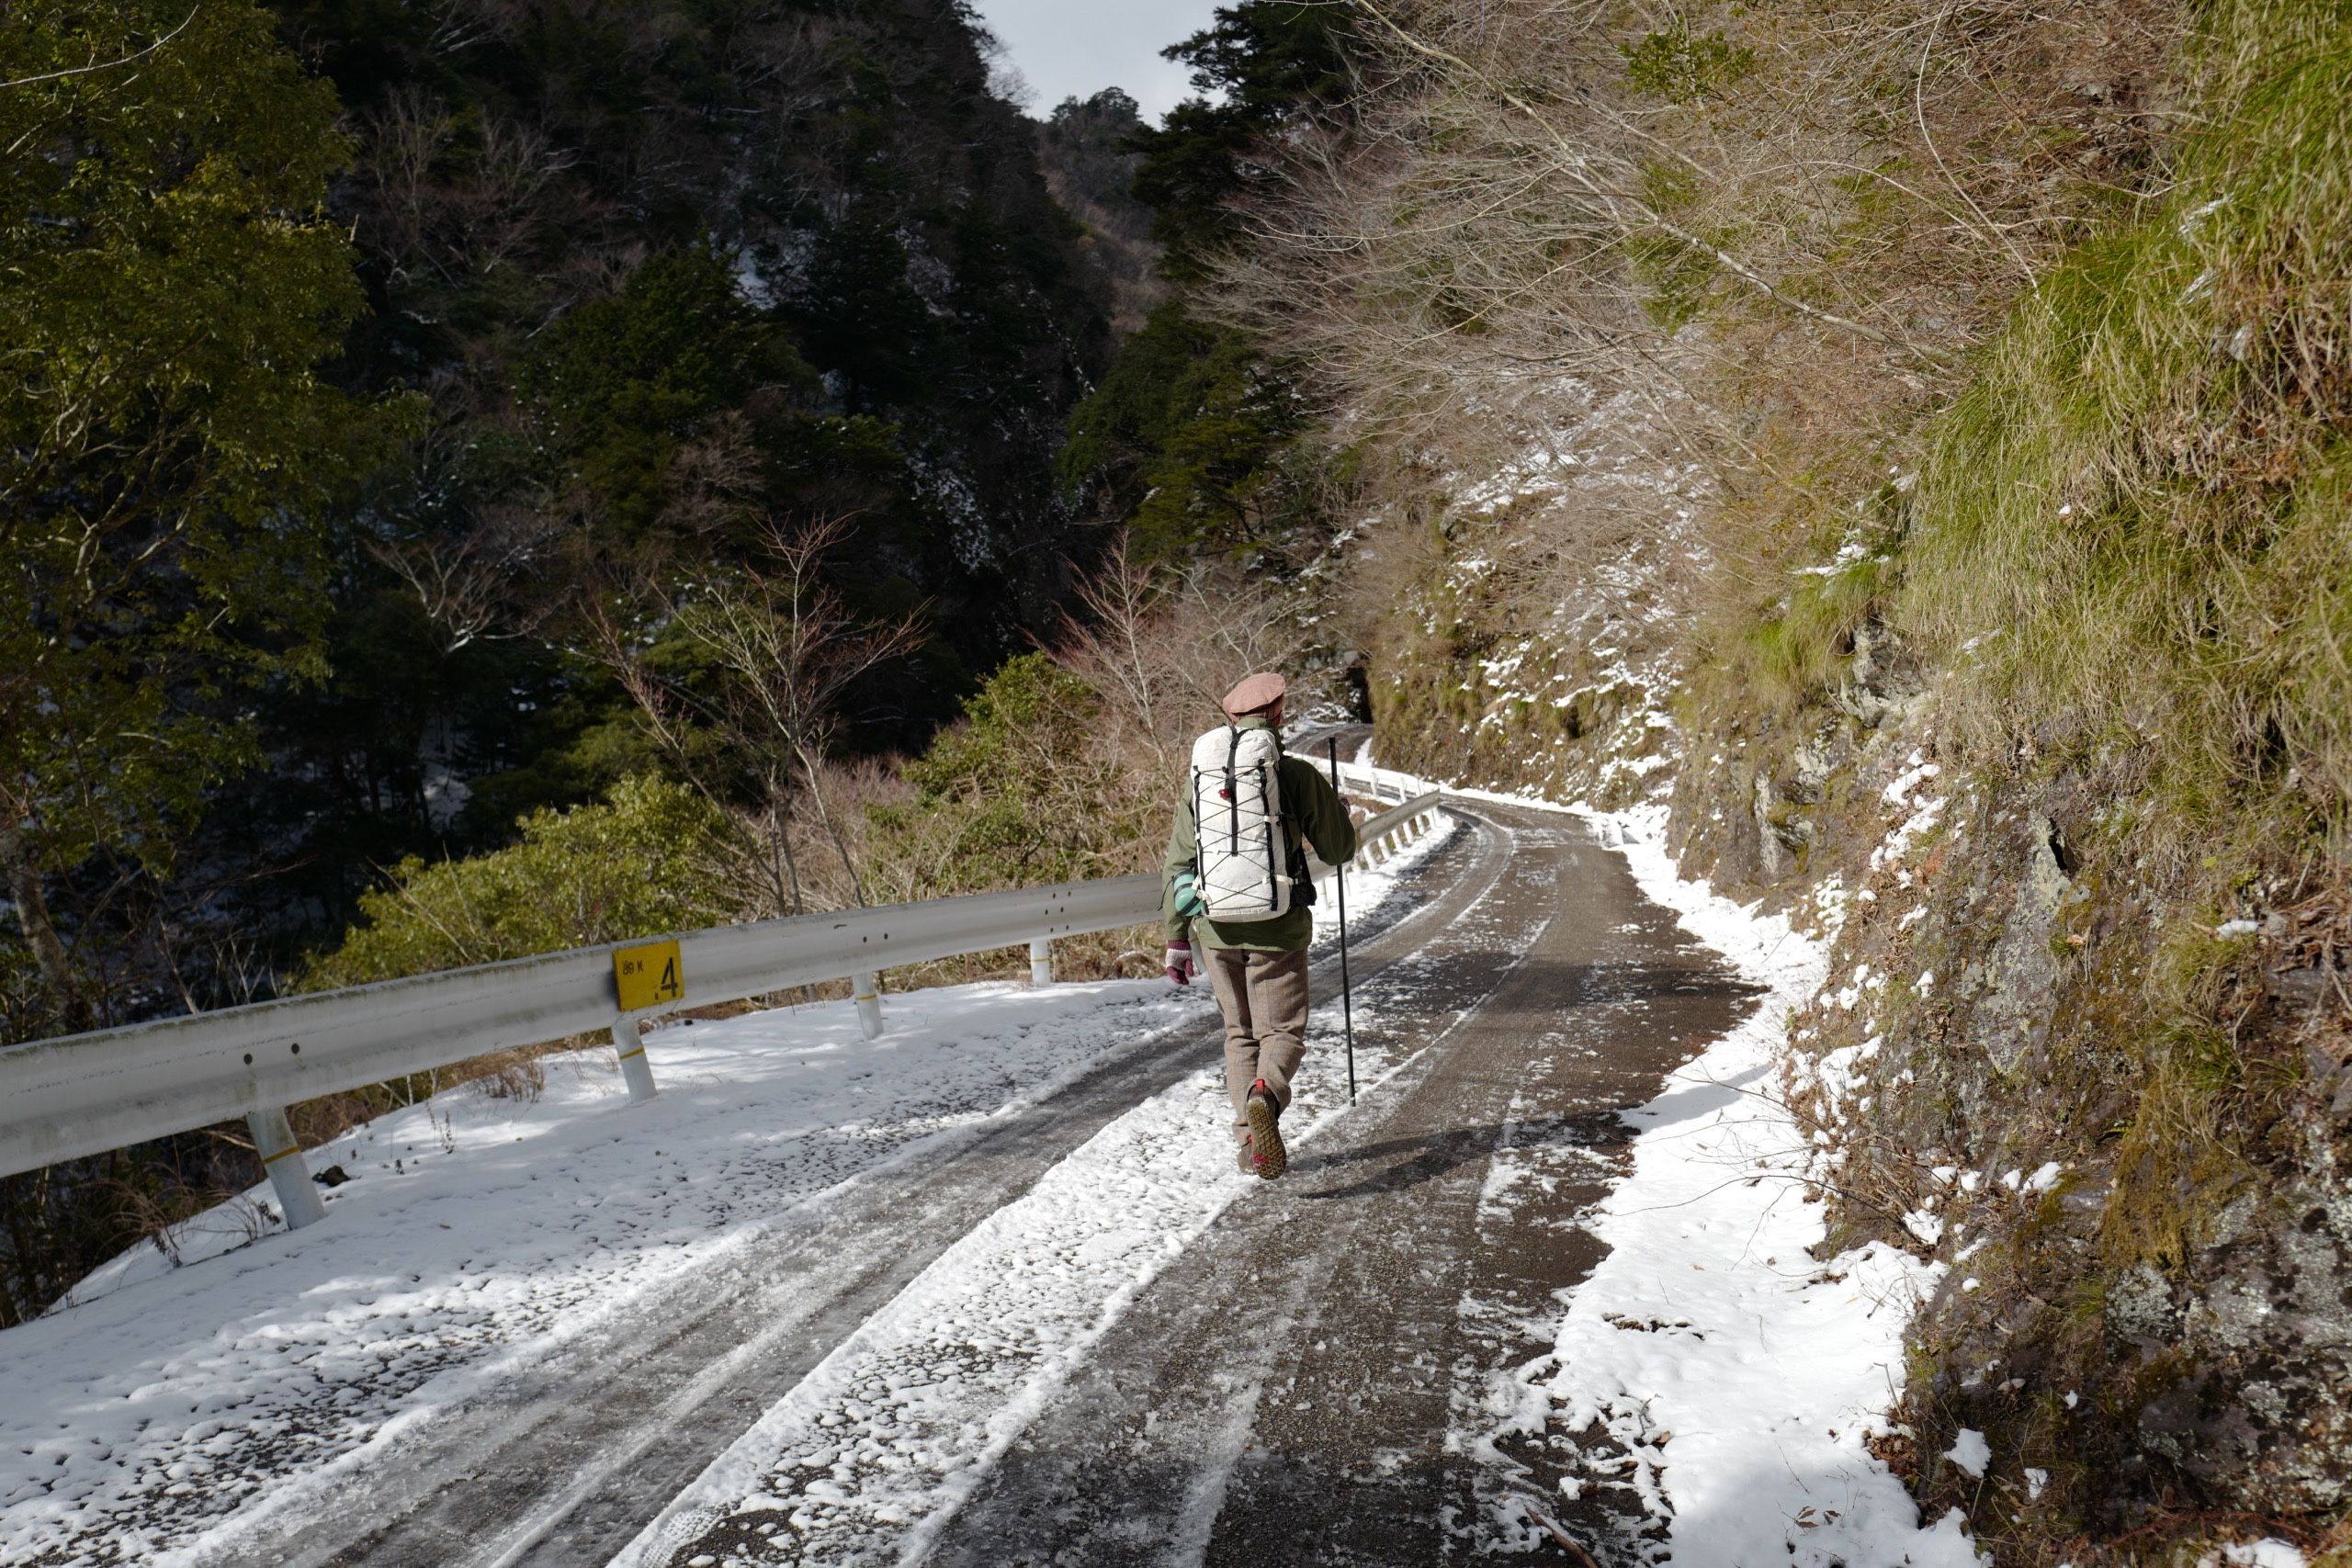 A man carrying a white rucksack, the author, walks down a snow-covered road in a narrow gorge.